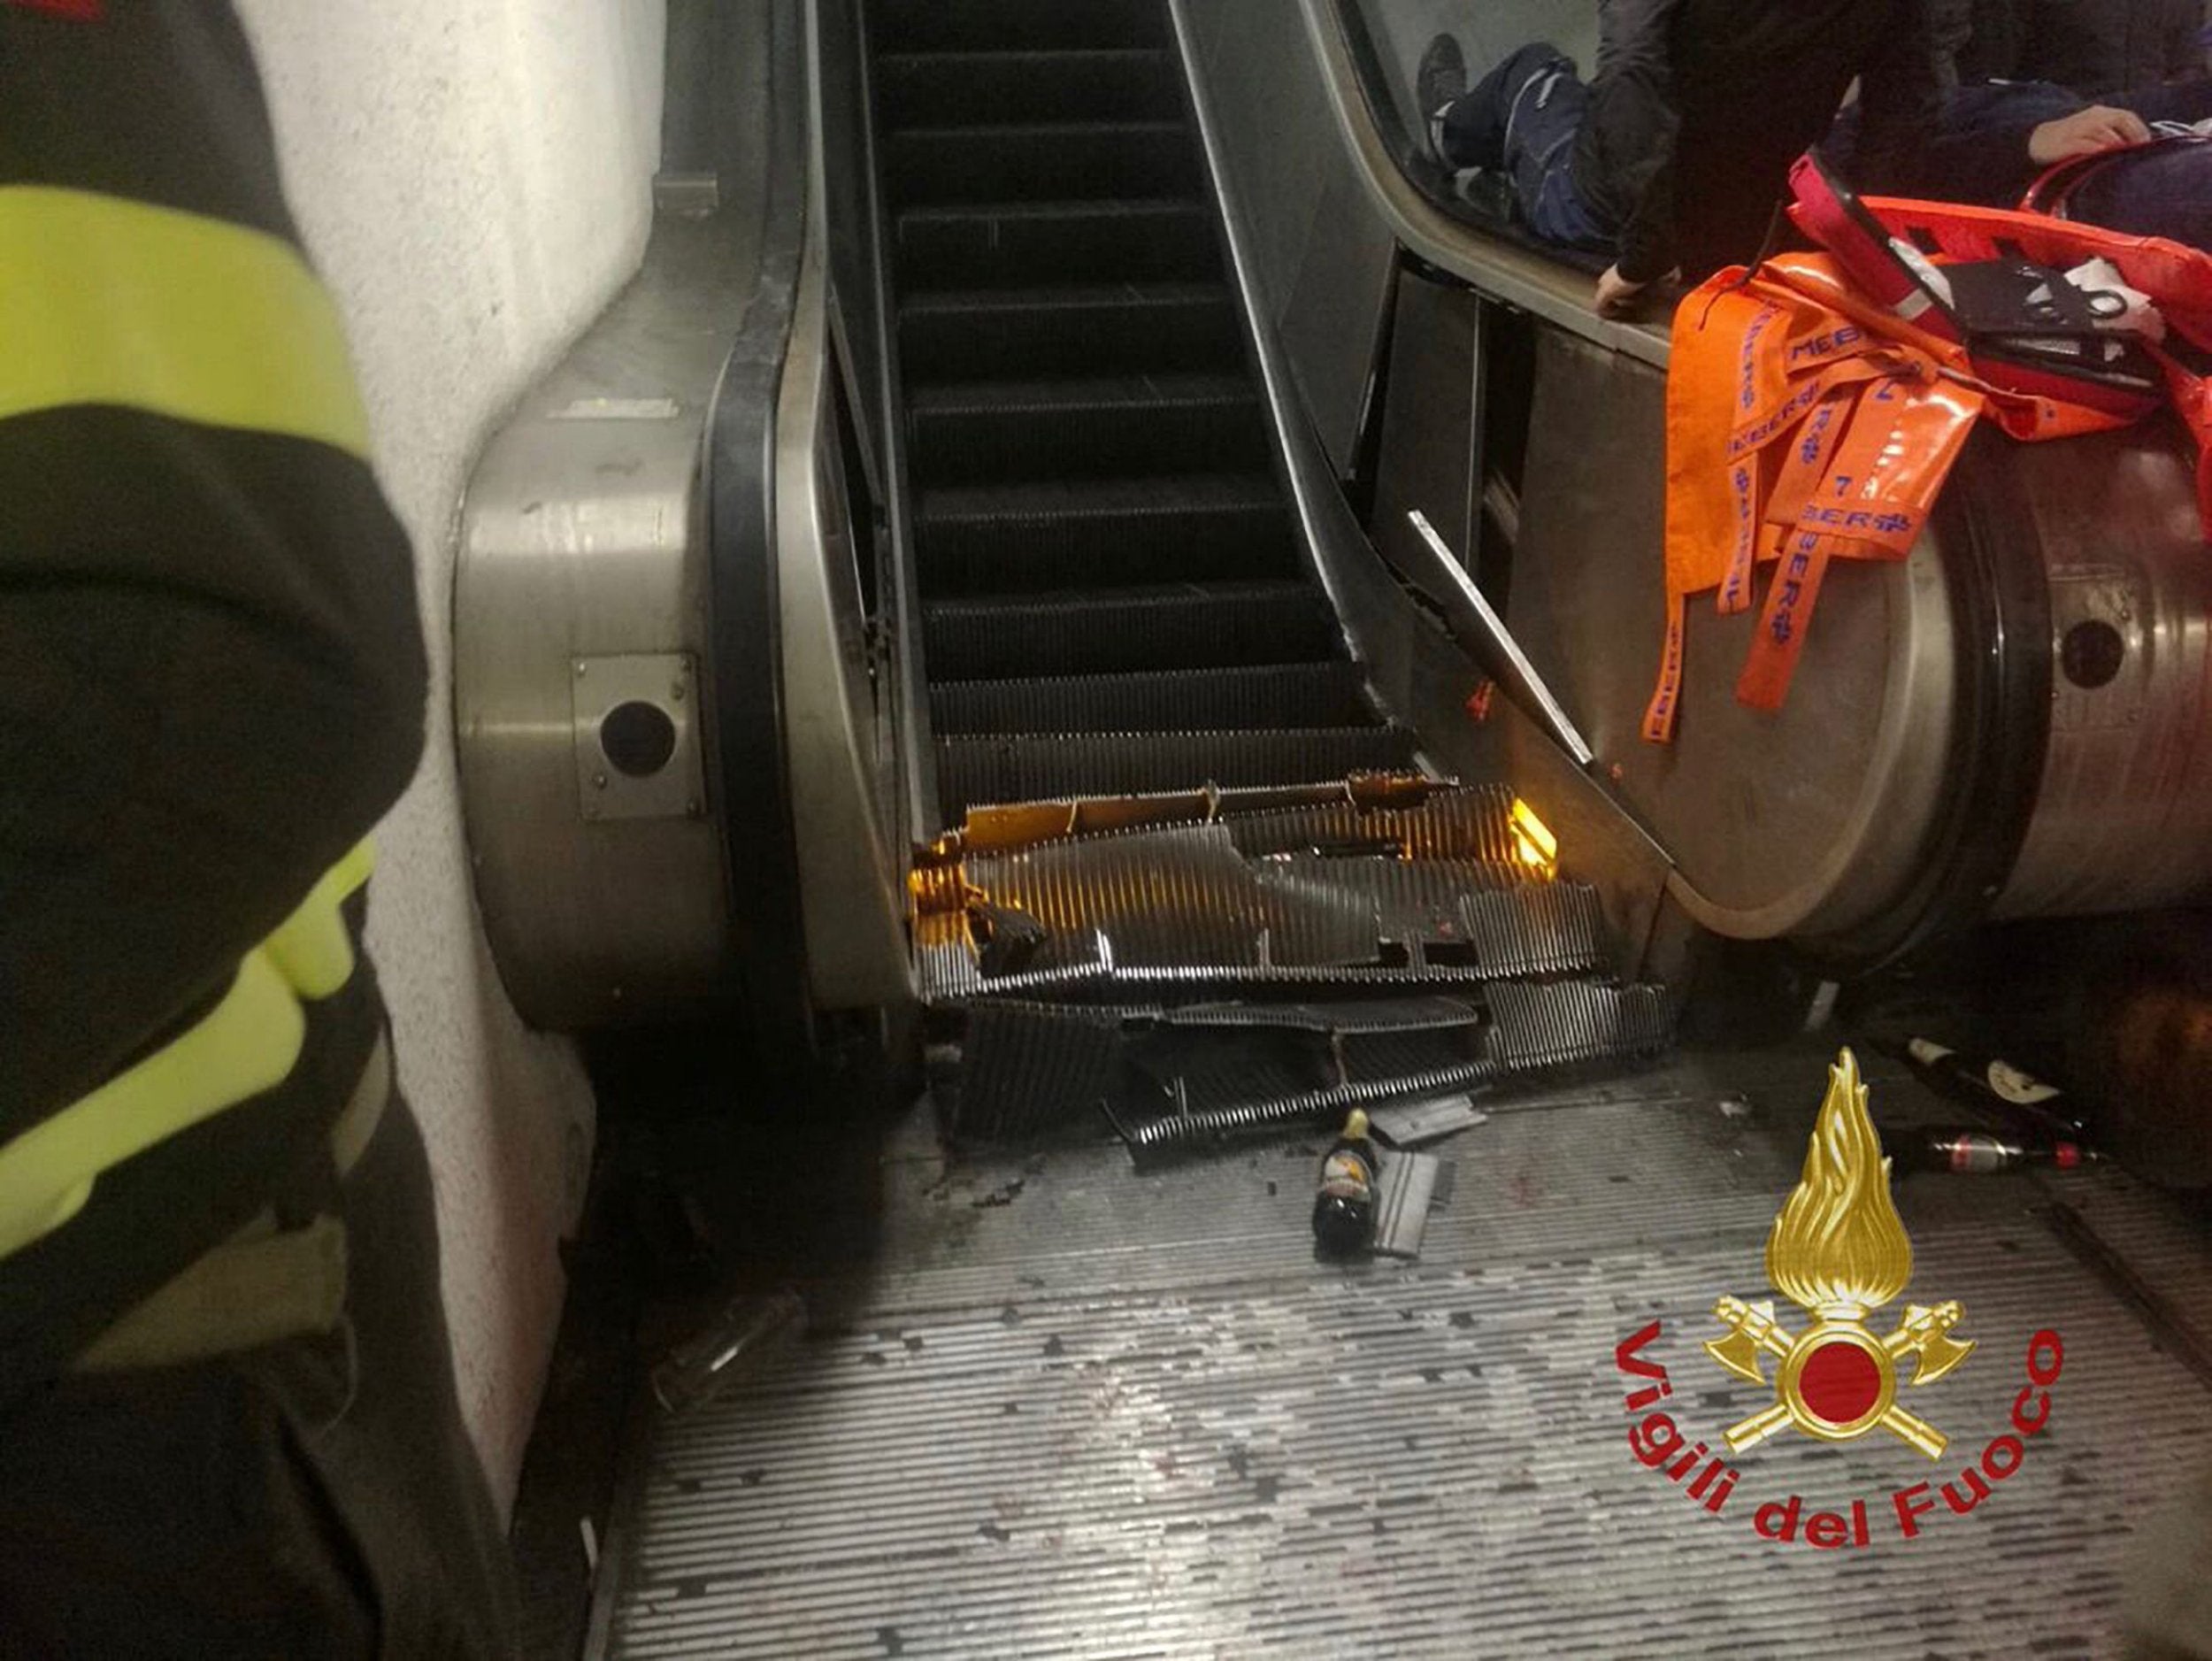 The wreckage of escalator after it jammed at Repubblica metro station in Rome